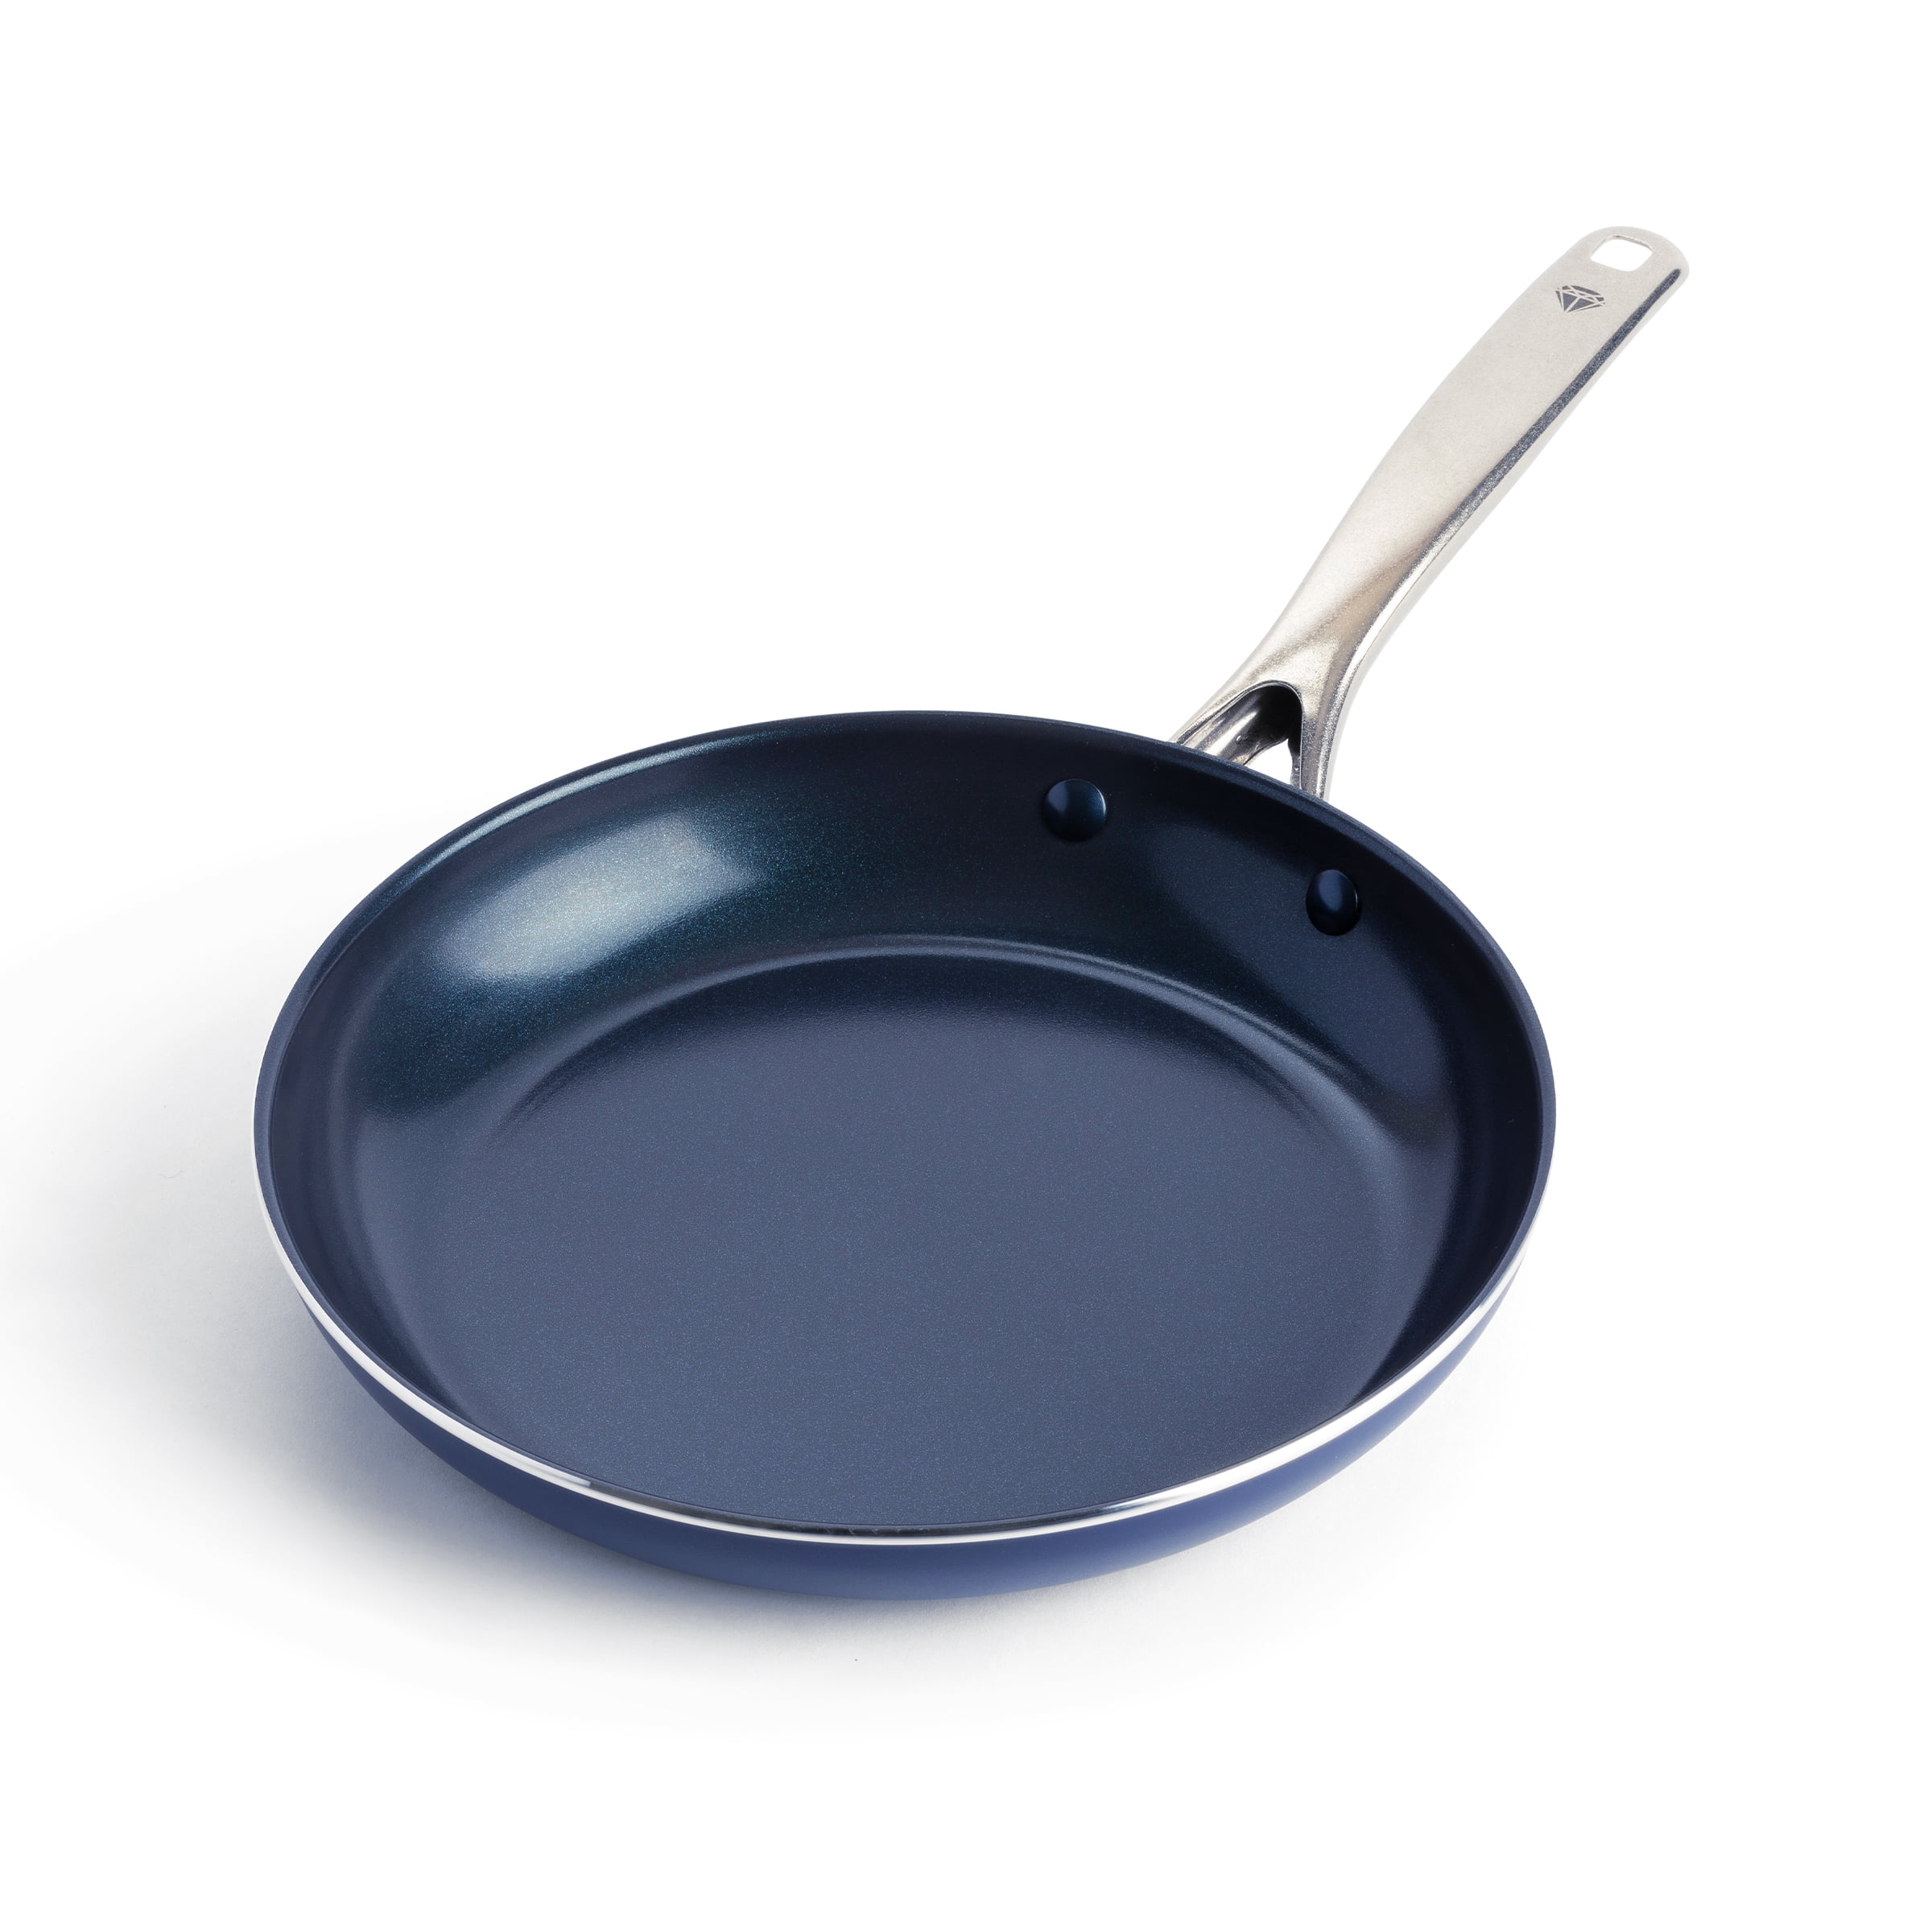  Caraway Nonstick Ceramic Frying Pan (2.7 qt, 10.5) - Non  Toxic, PTFE & PFOA Free - Oven Safe & Compatible with All Stovetops (Gas,  Electric & Induction) - Navy: Home & Kitchen